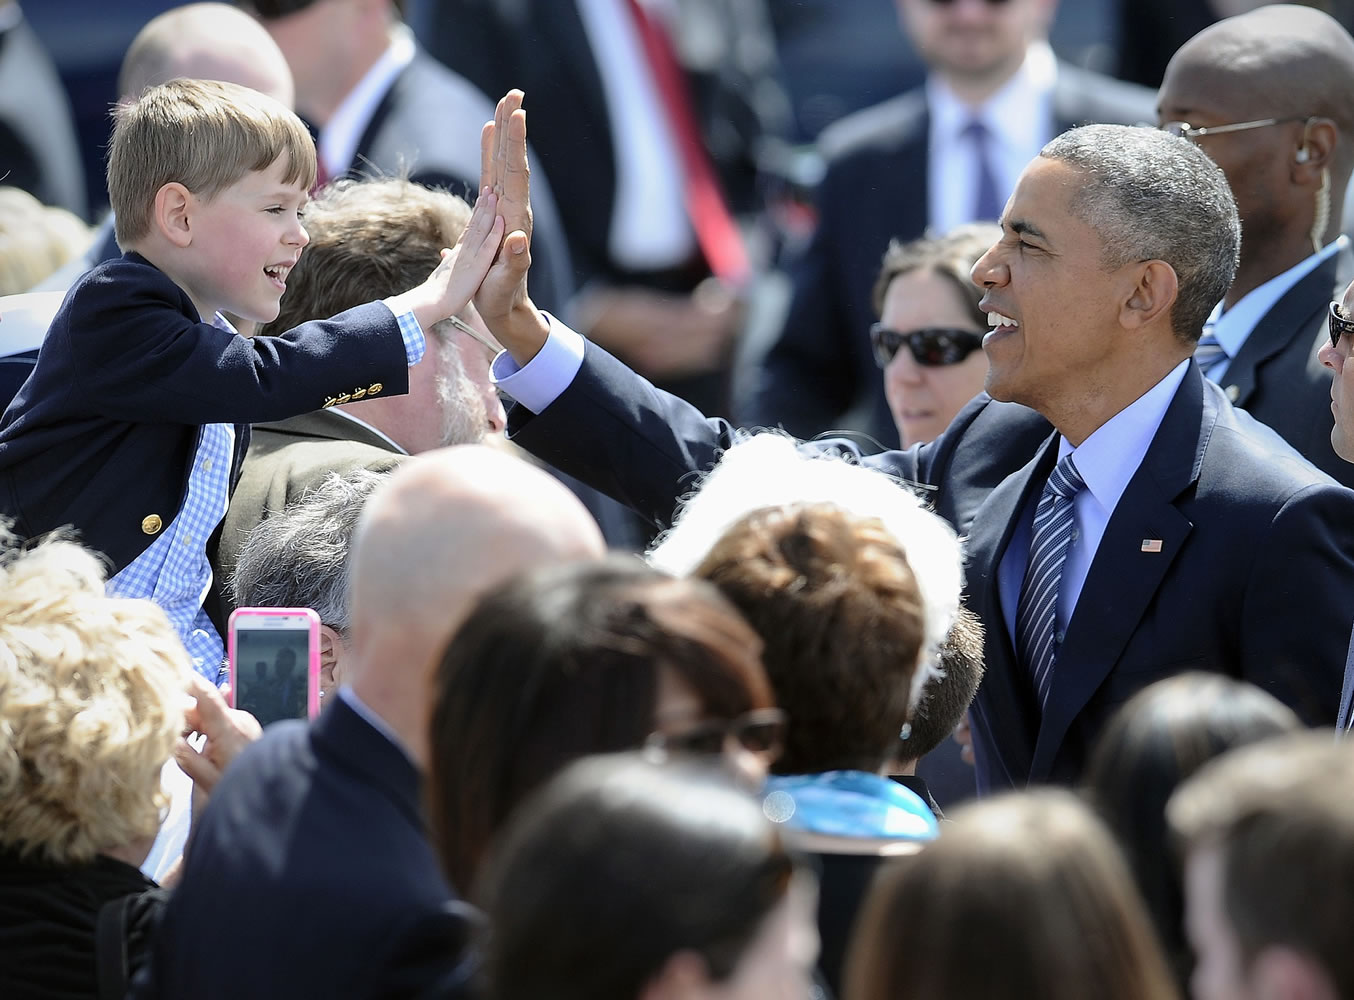 President Barack Obama high-fives Trey Vance, 5, of Waterbury, Conn., after arriving at Groton-New London Airport on Wednesday in Groton, Conn. Tomorrow is Vance's sixth birthday.